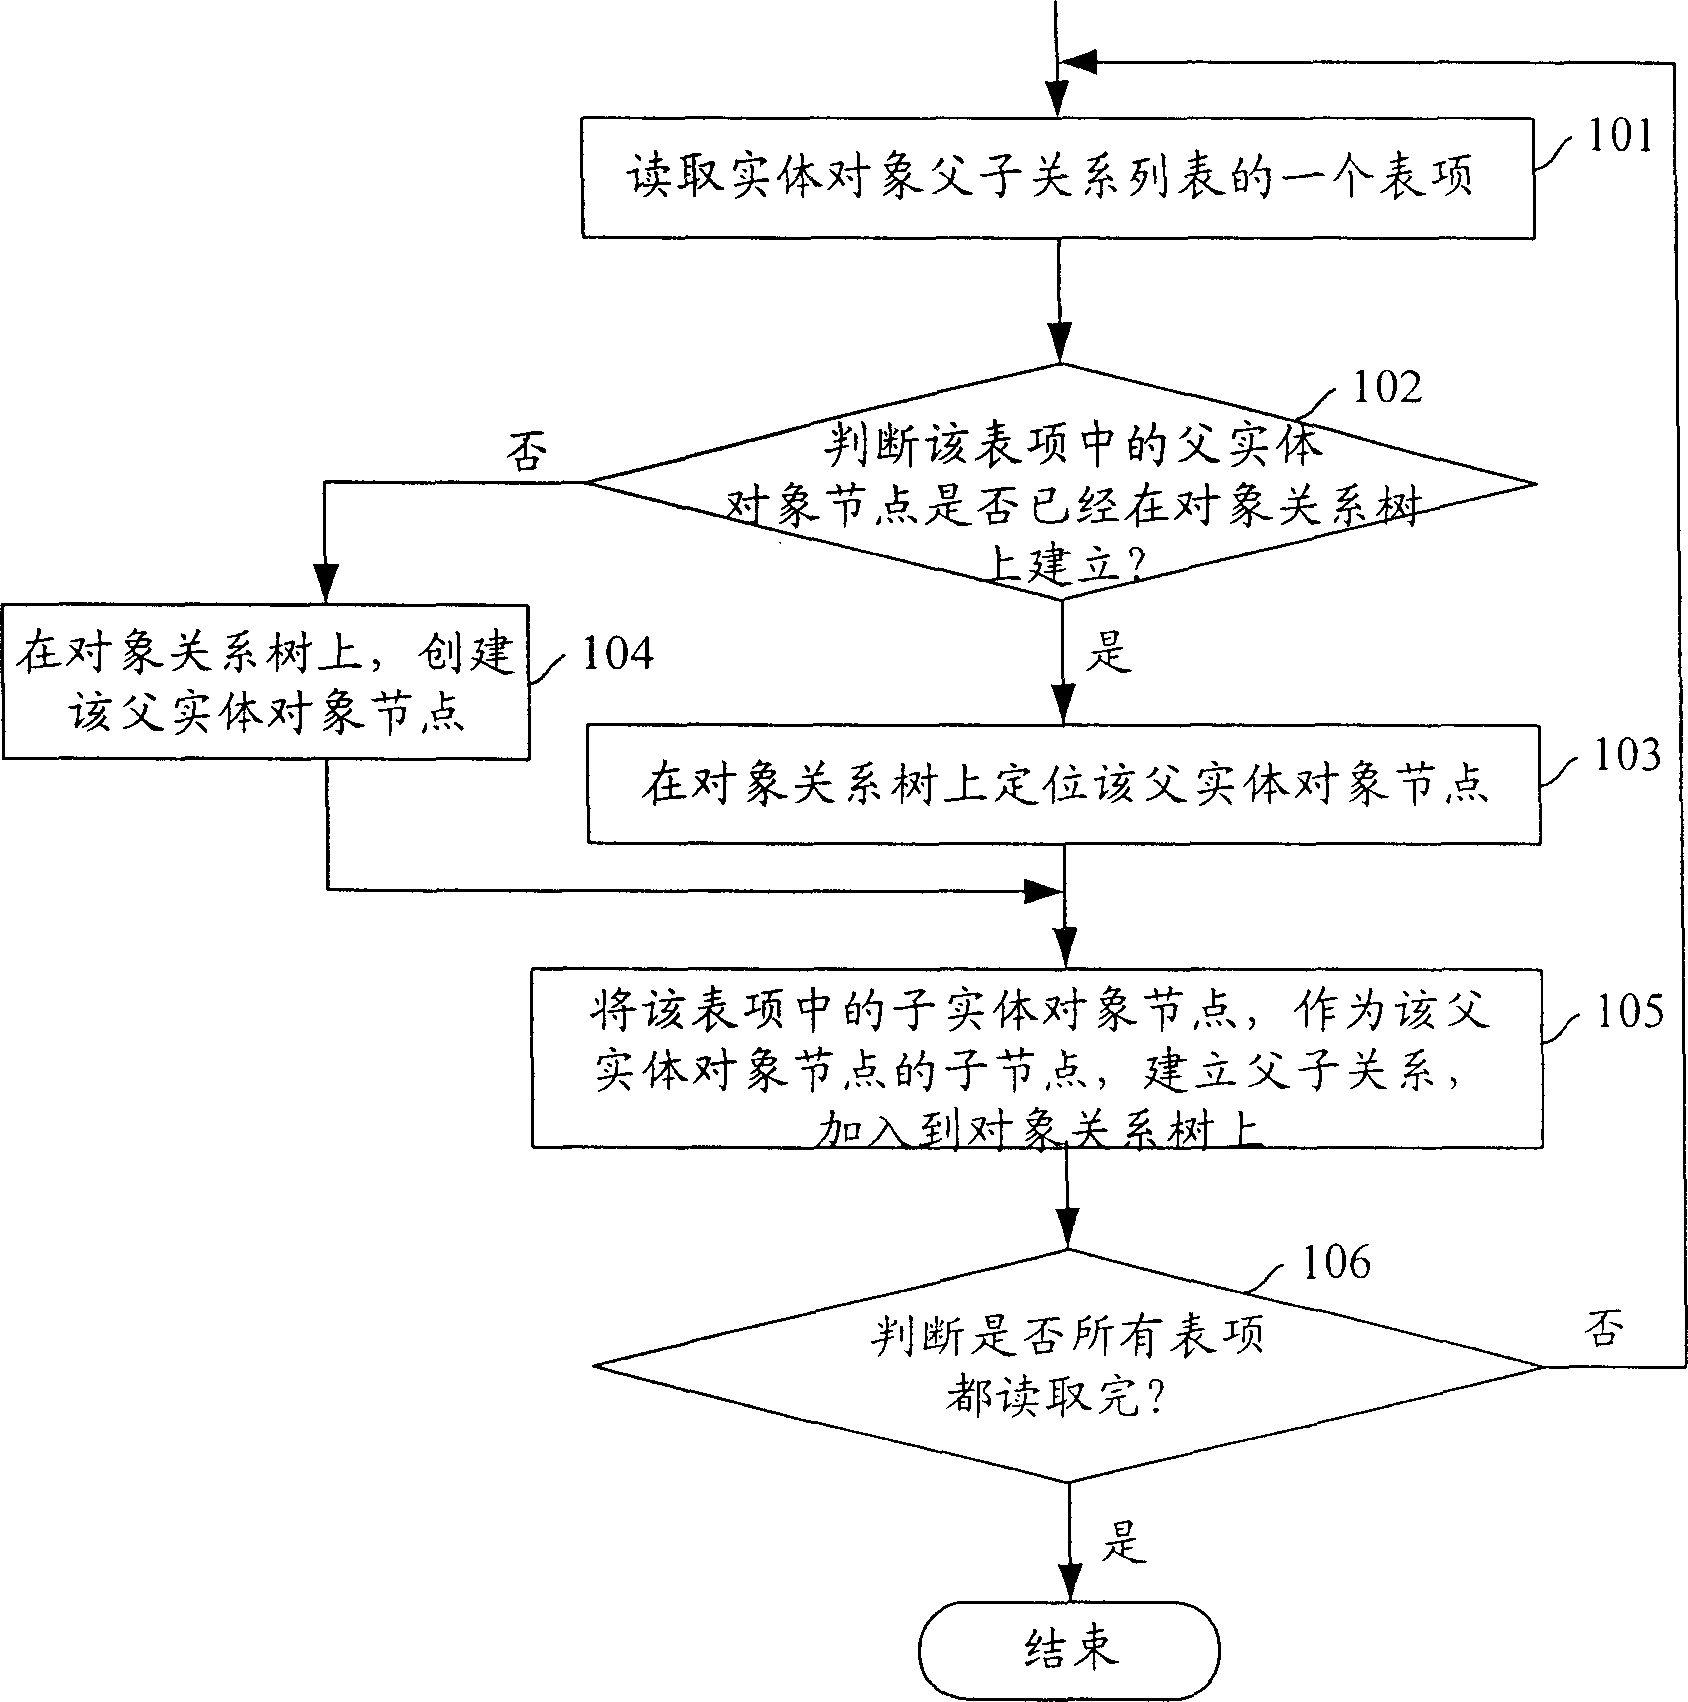 Method for realizing system resources management